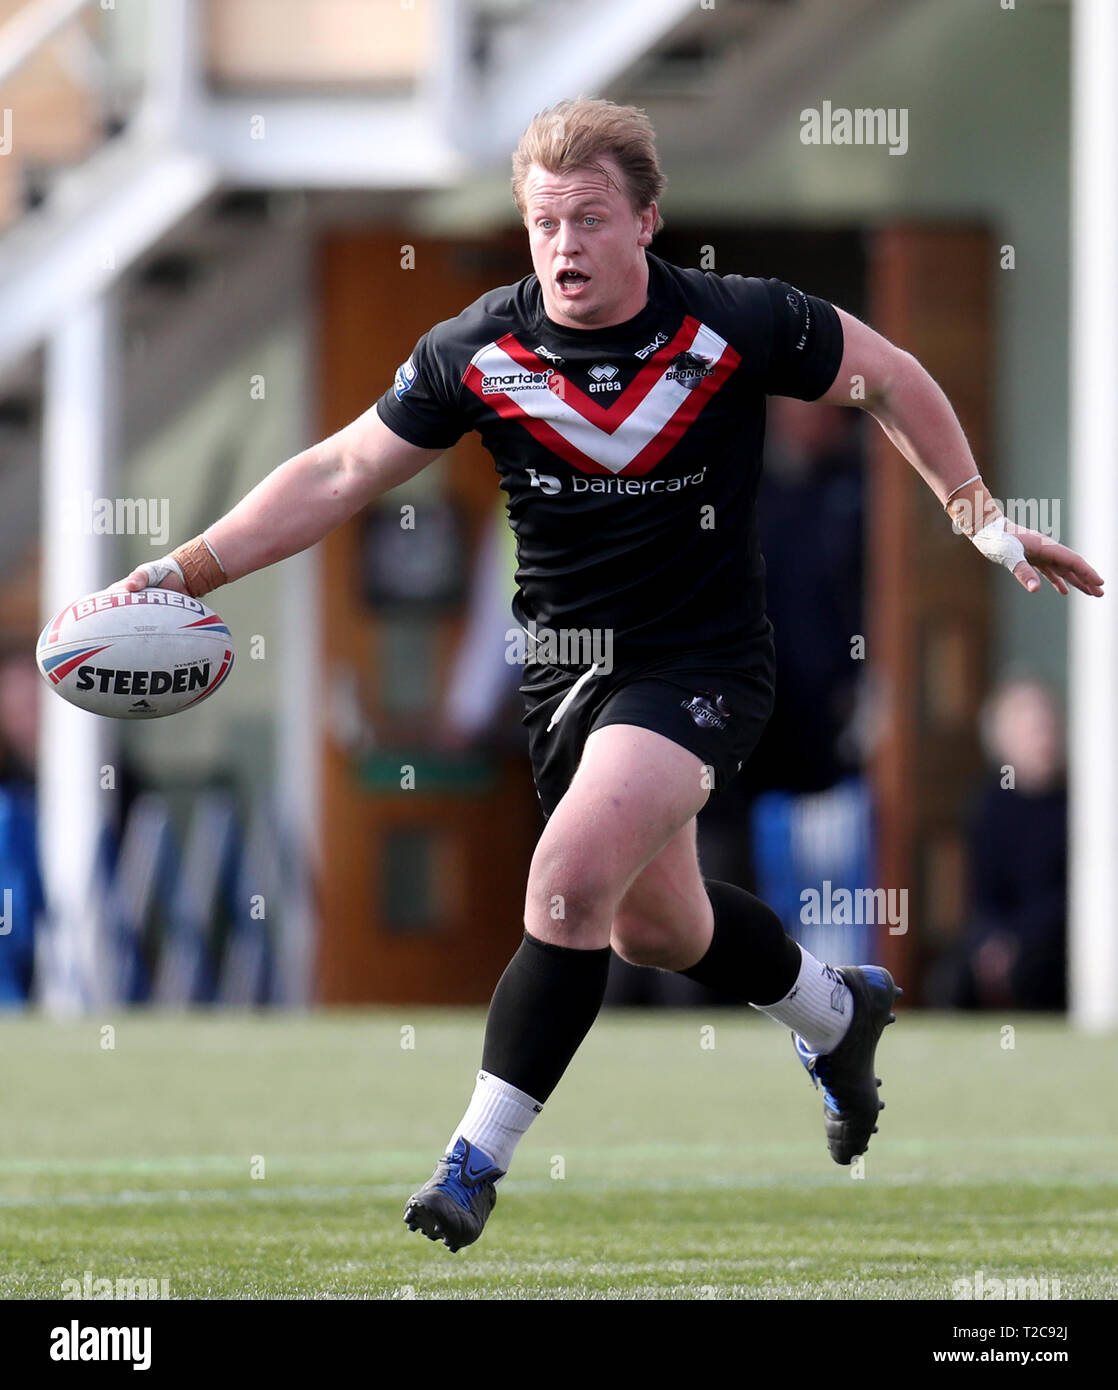 London Broncos' Eddie Battye in action during the Betfred Super League match at Trailfinders sports Club, London. Stock Photo